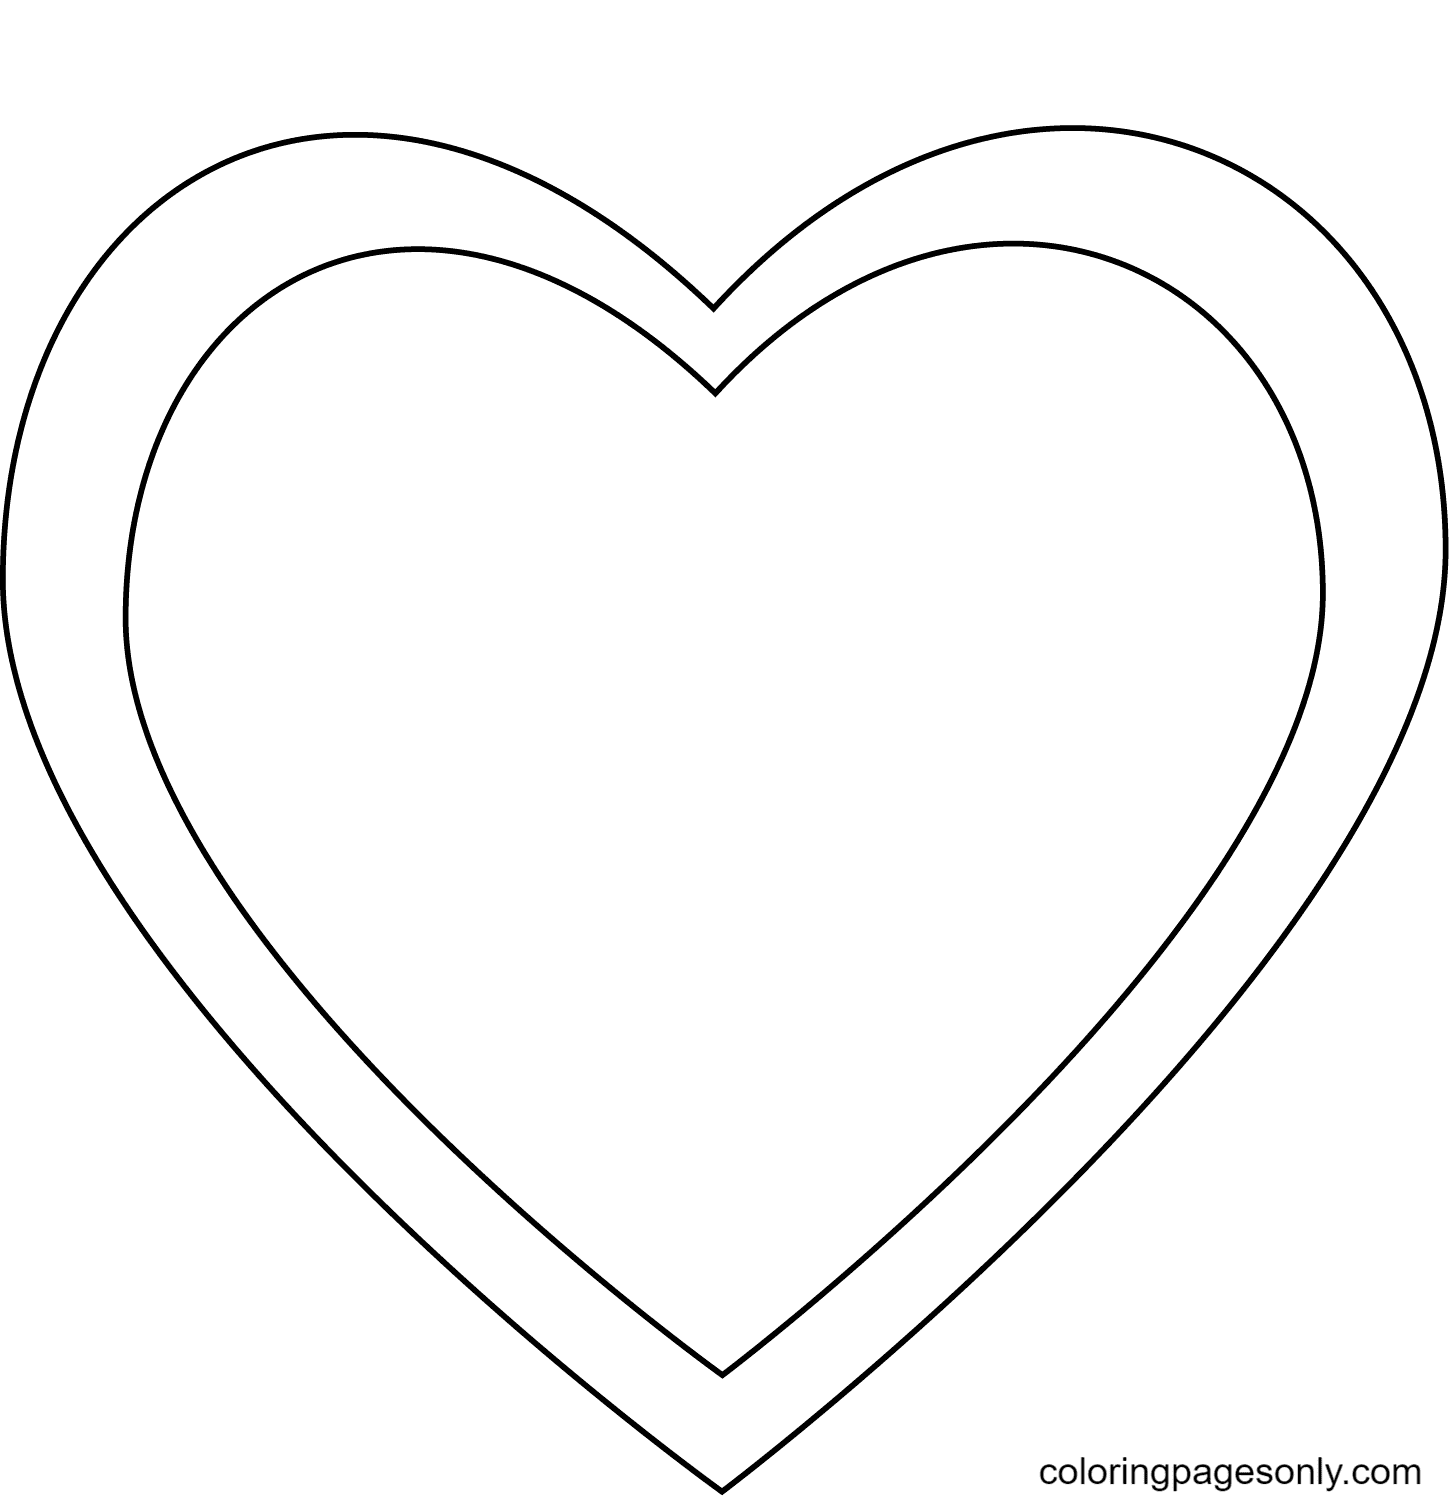 Simple Heart Coloring Pages